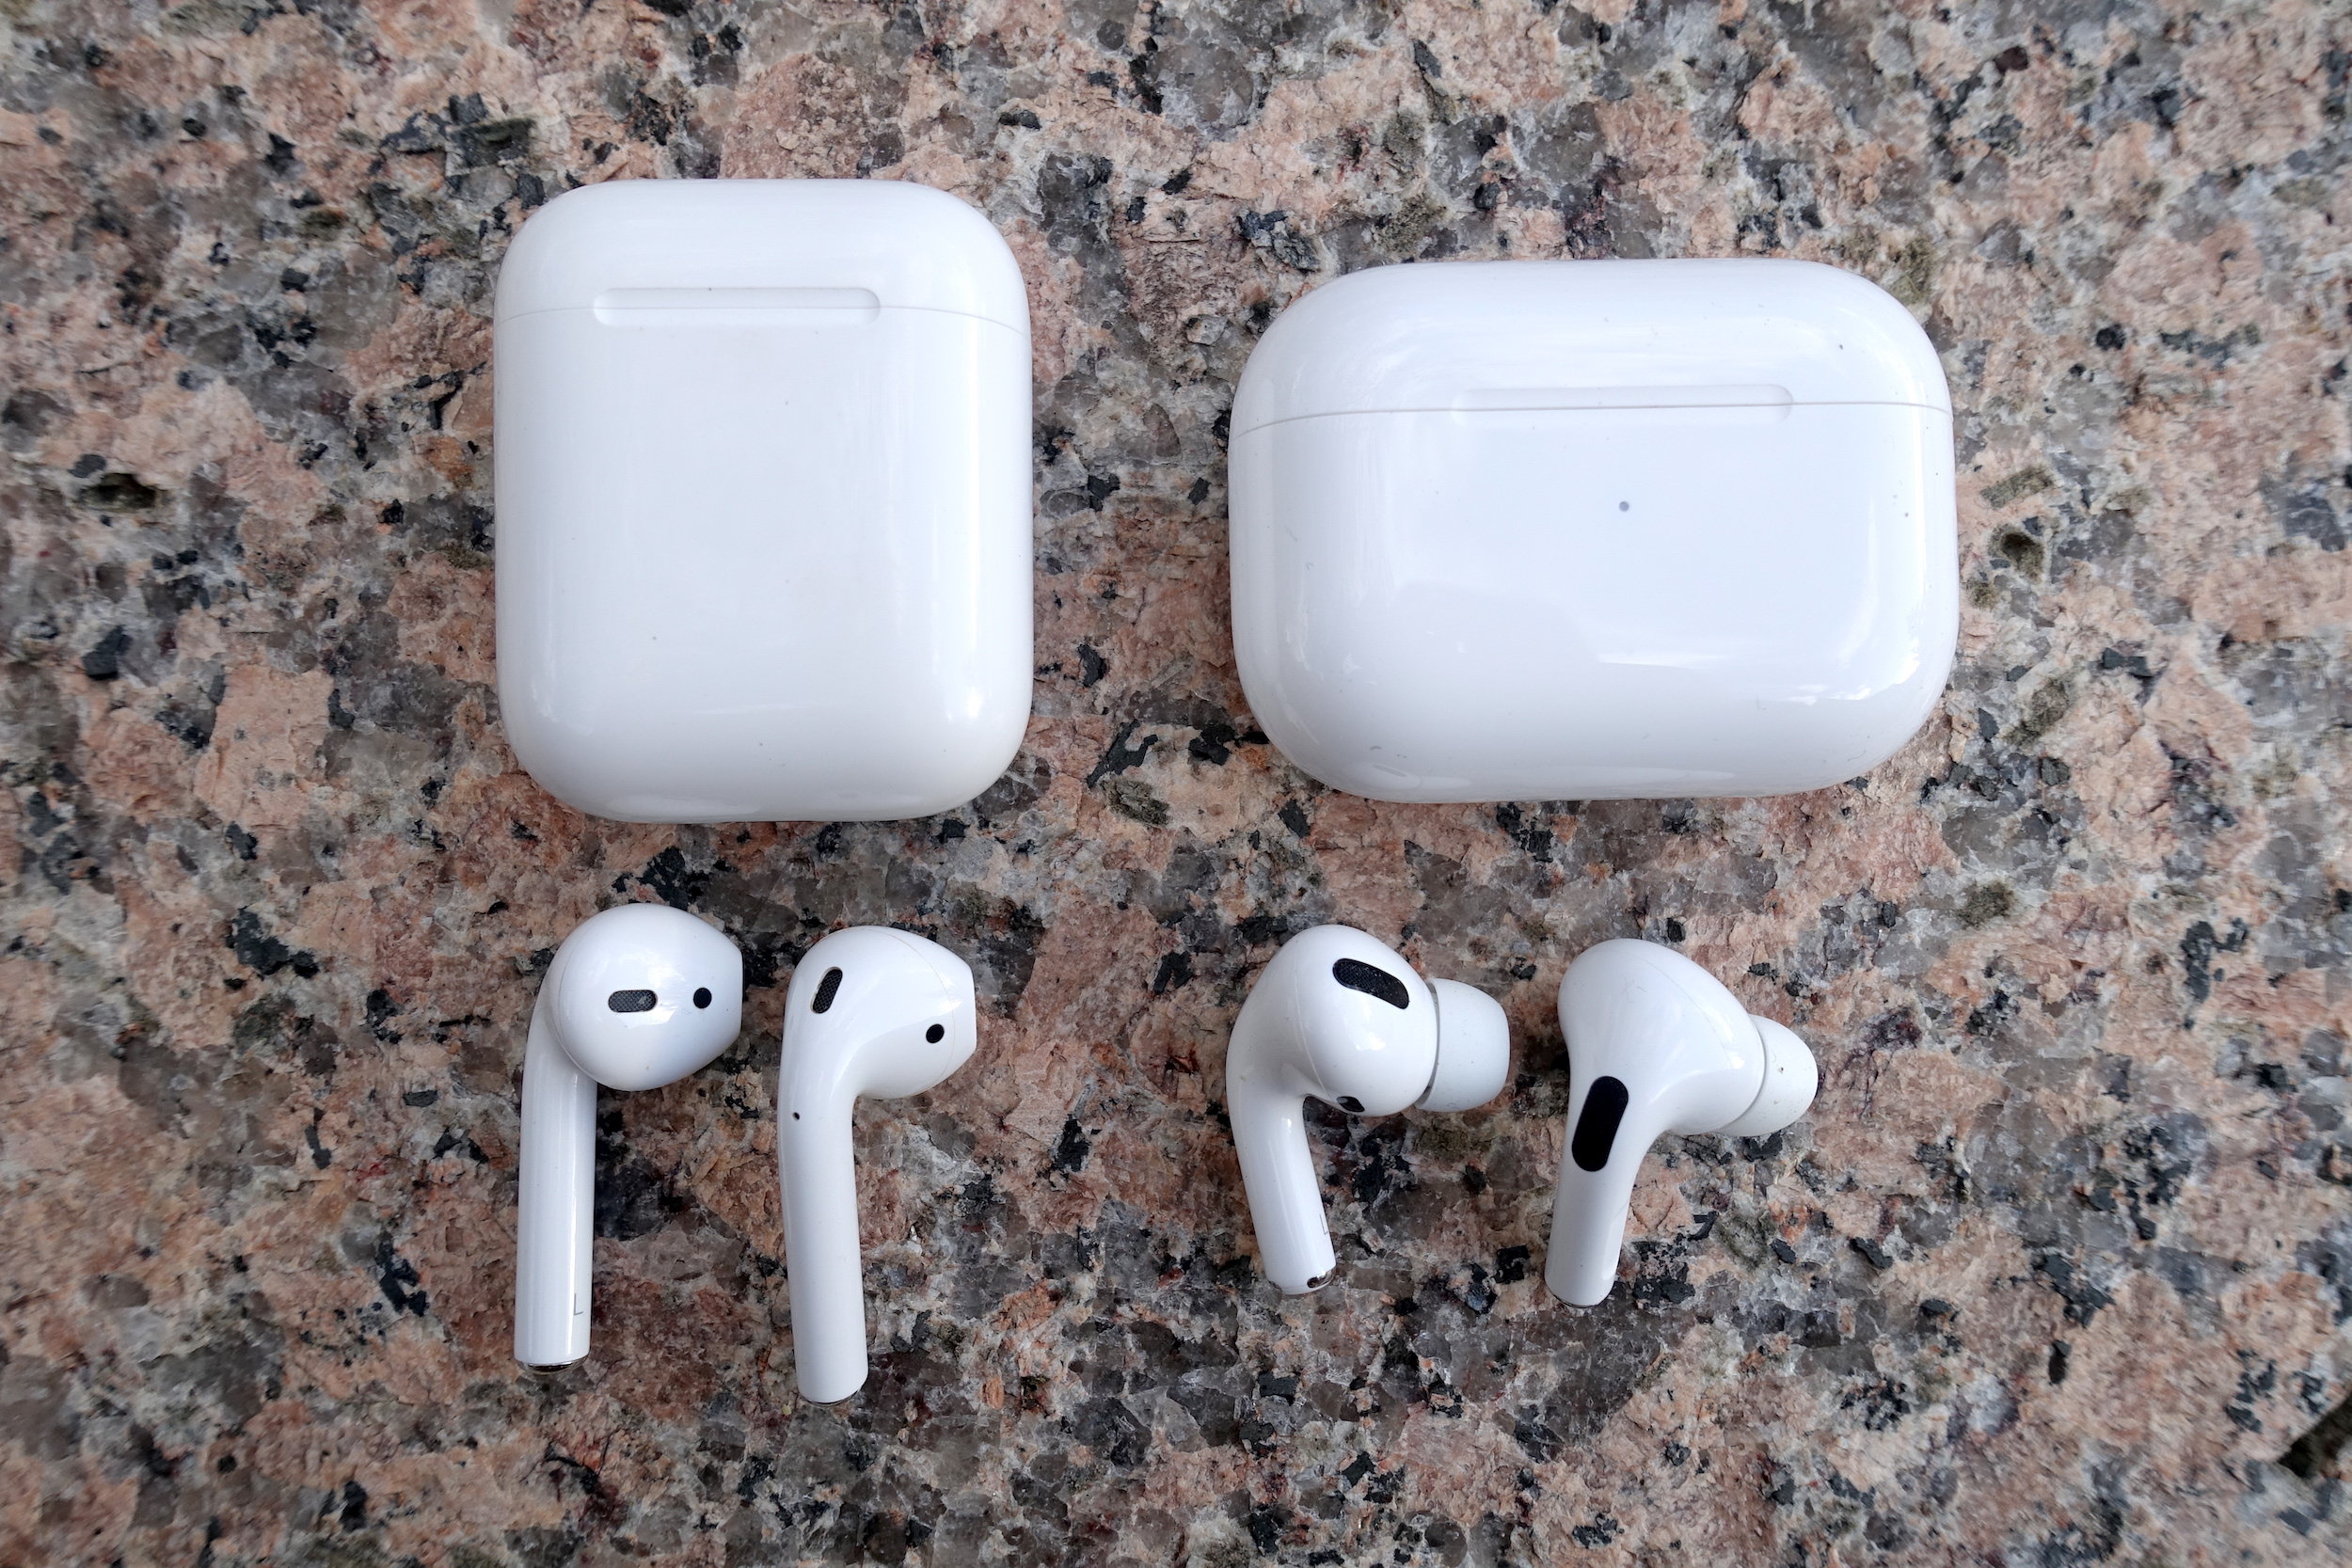 Apple AirPods deal discounts headphones with wireless charging 